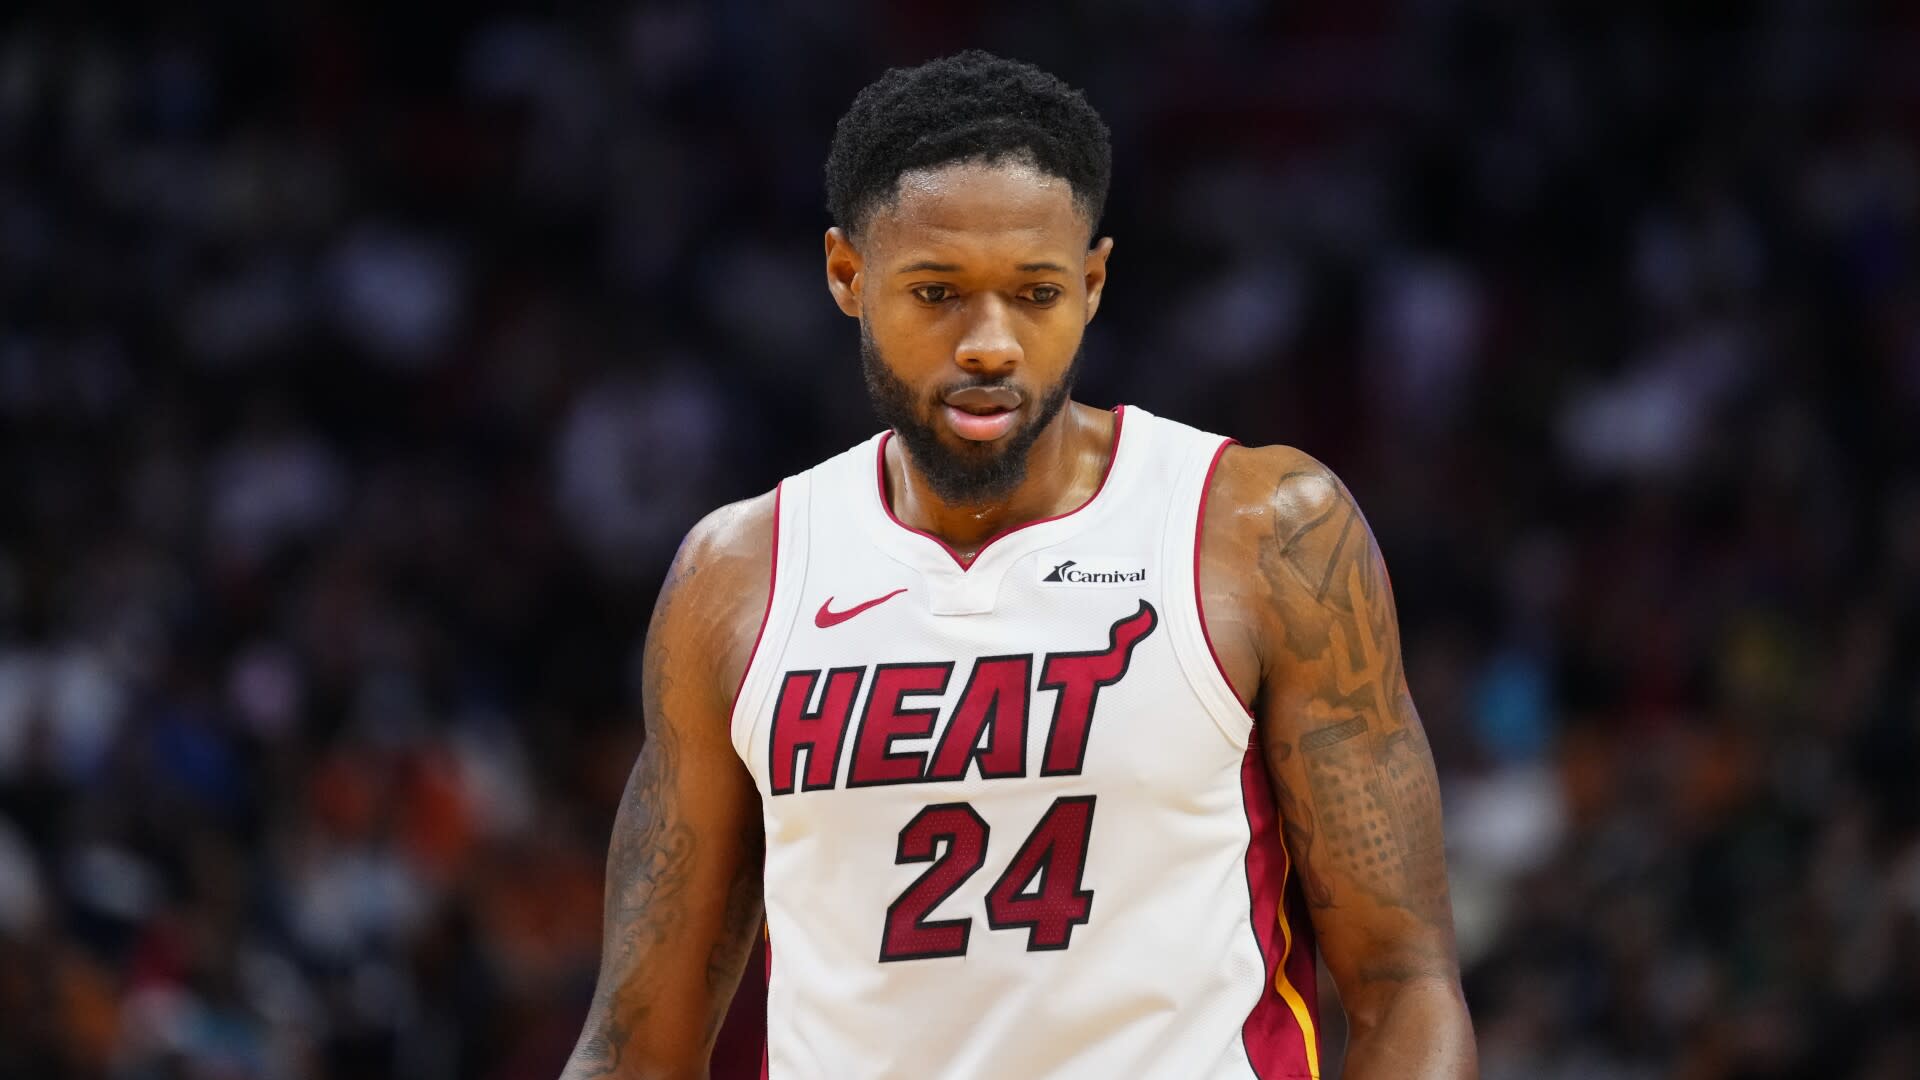 Heat's Haywood Highsmith sued over traffic accident that led to partial amputation of man's leg